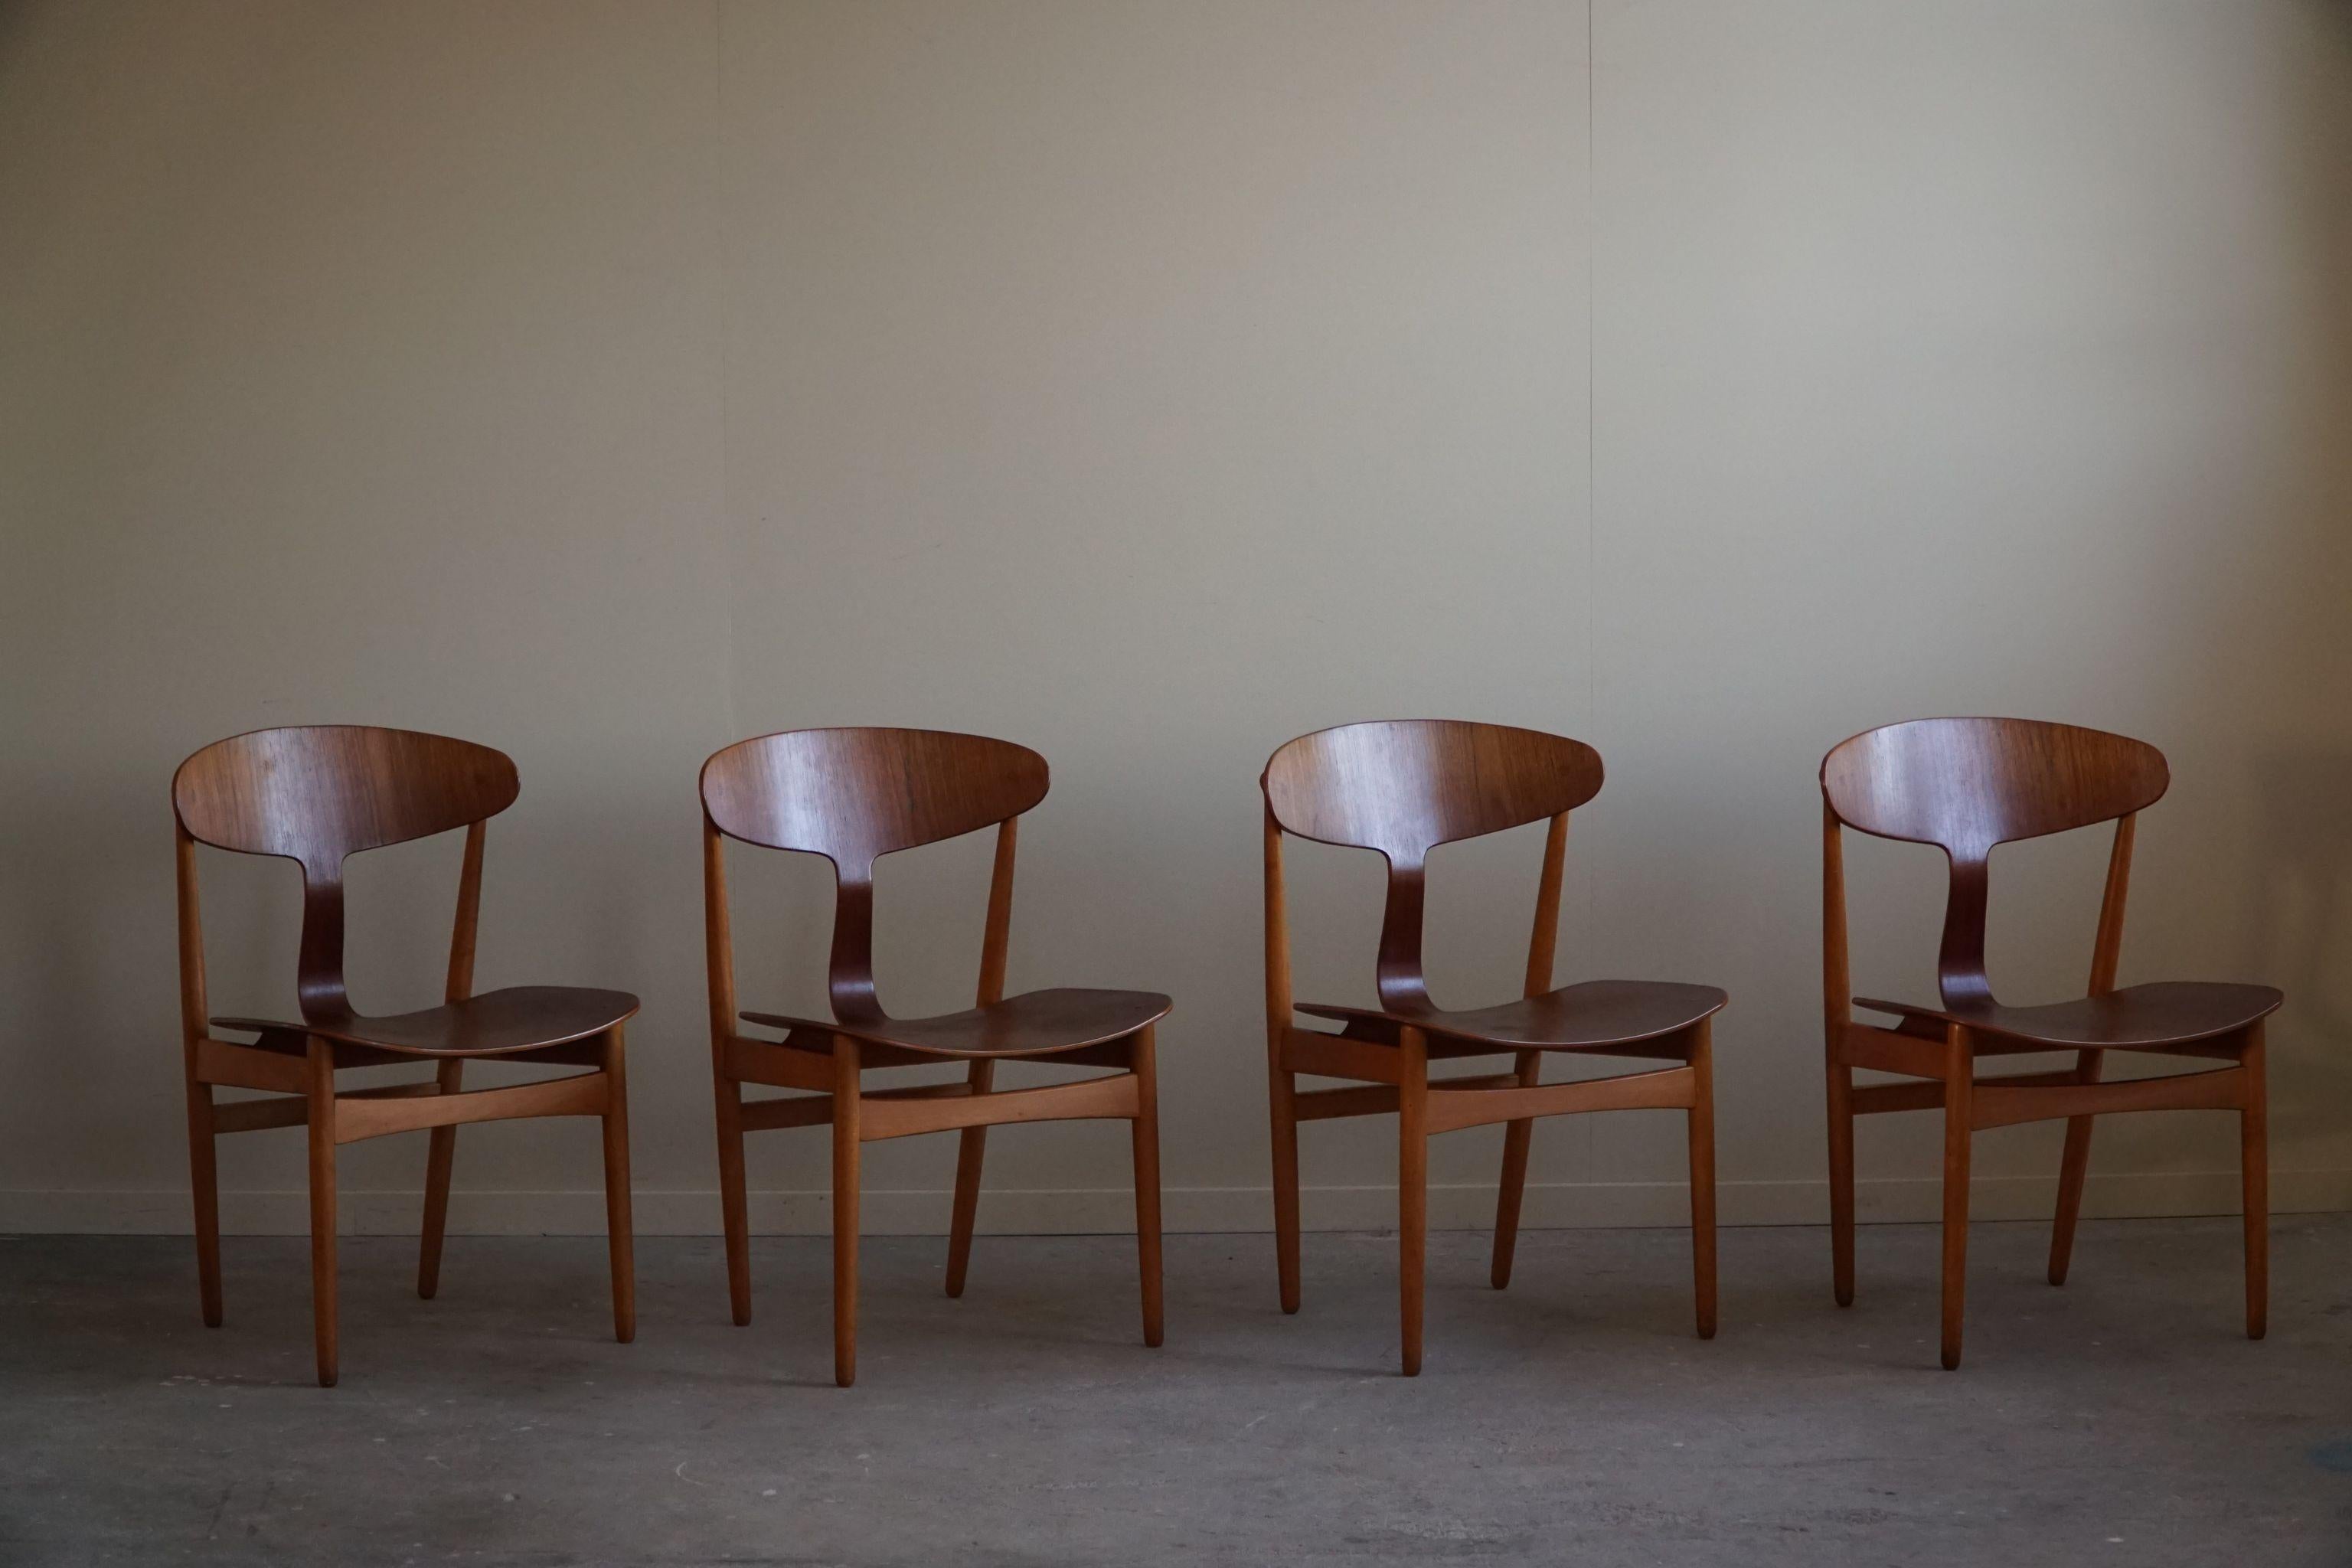 This rare set of four dining chairs, known as Model 46, was crafted in 1954 by Danish designers Ejner Larsen and Aksel Bender Madsen for Brande Møbelfabrik in Denmark. Embodying the essence of mid-century modern design, these chairs showcase a